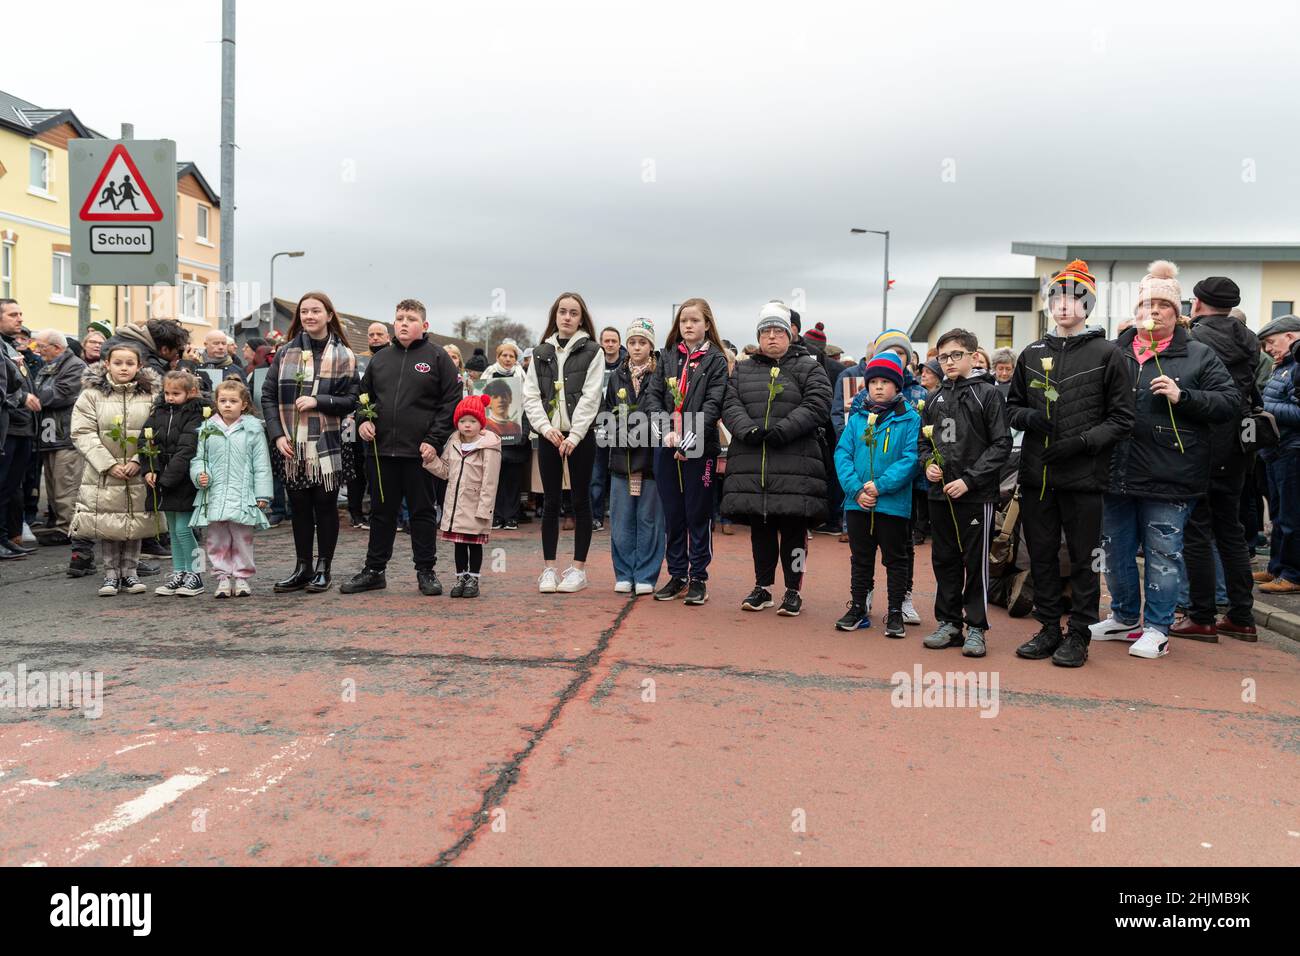 Derry, UK. 30th Jan, 2022. Central Drive, Derry, Family members of those who lost loved ones on Bloody Sunday(30th January 1972) gathered to walk the route in an act of remembrance. At the Bloddy Sunday Memorial, Wreaths were laid by Family and Politicians from the North and South of Ireland. Credit: Bonzo/Alamy Live News Stock Photo